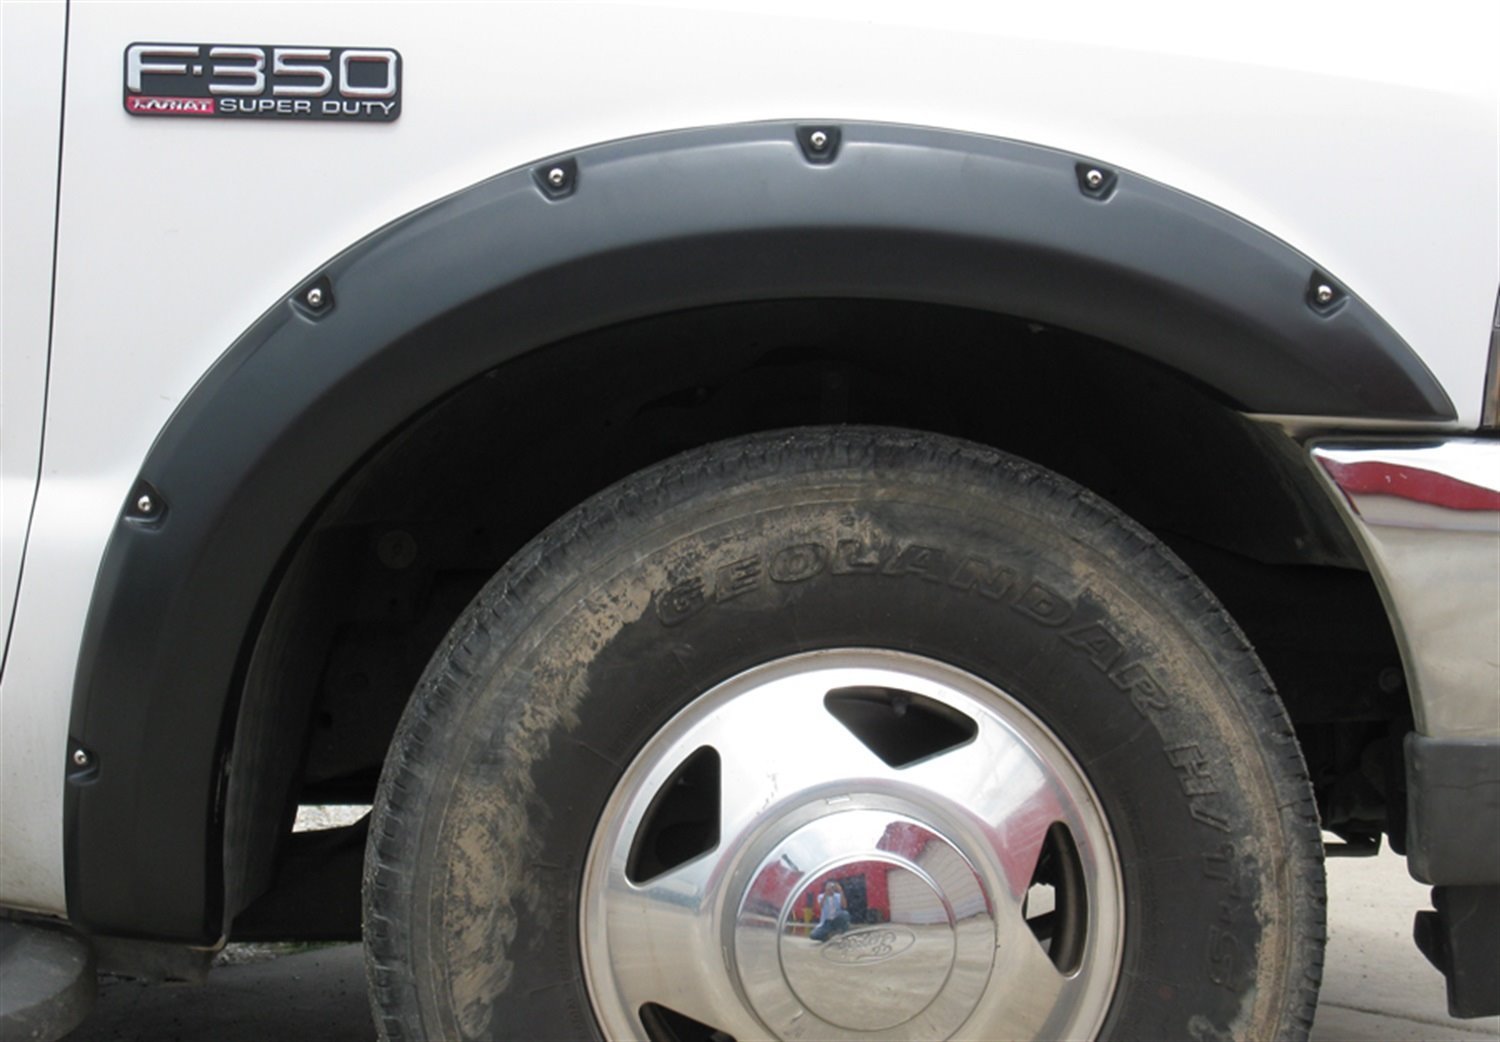 RX Rivet-Style Fender Flares 1999-2007 Ford F-250/F-350 Super Duty